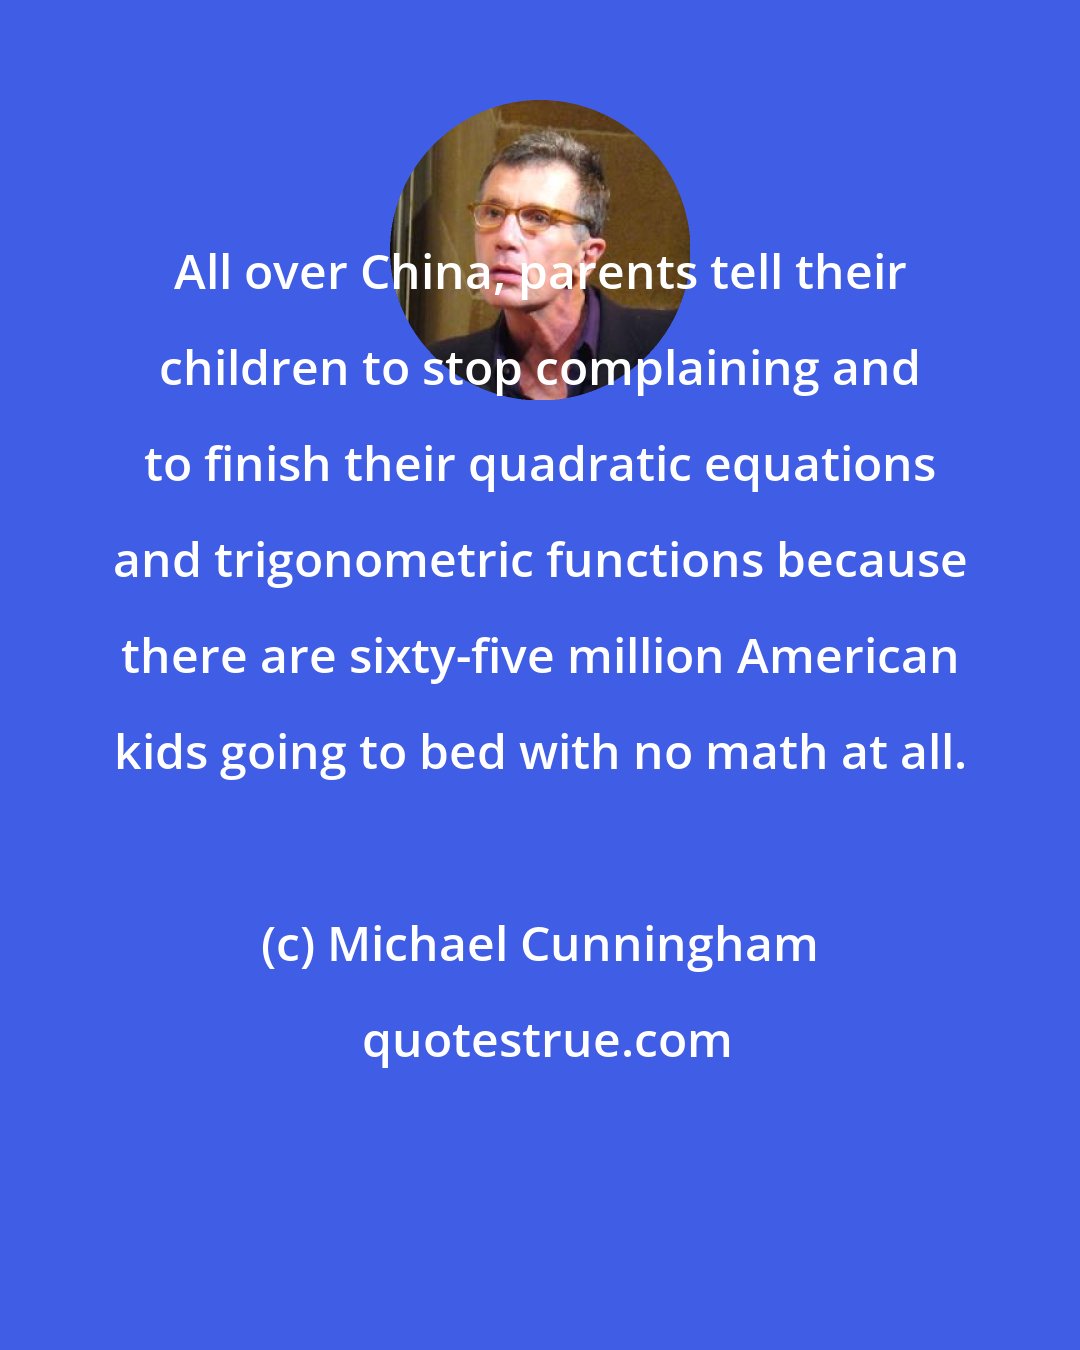 Michael Cunningham: All over China, parents tell their children to stop complaining and to finish their quadratic equations and trigonometric functions because there are sixty-five million American kids going to bed with no math at all.